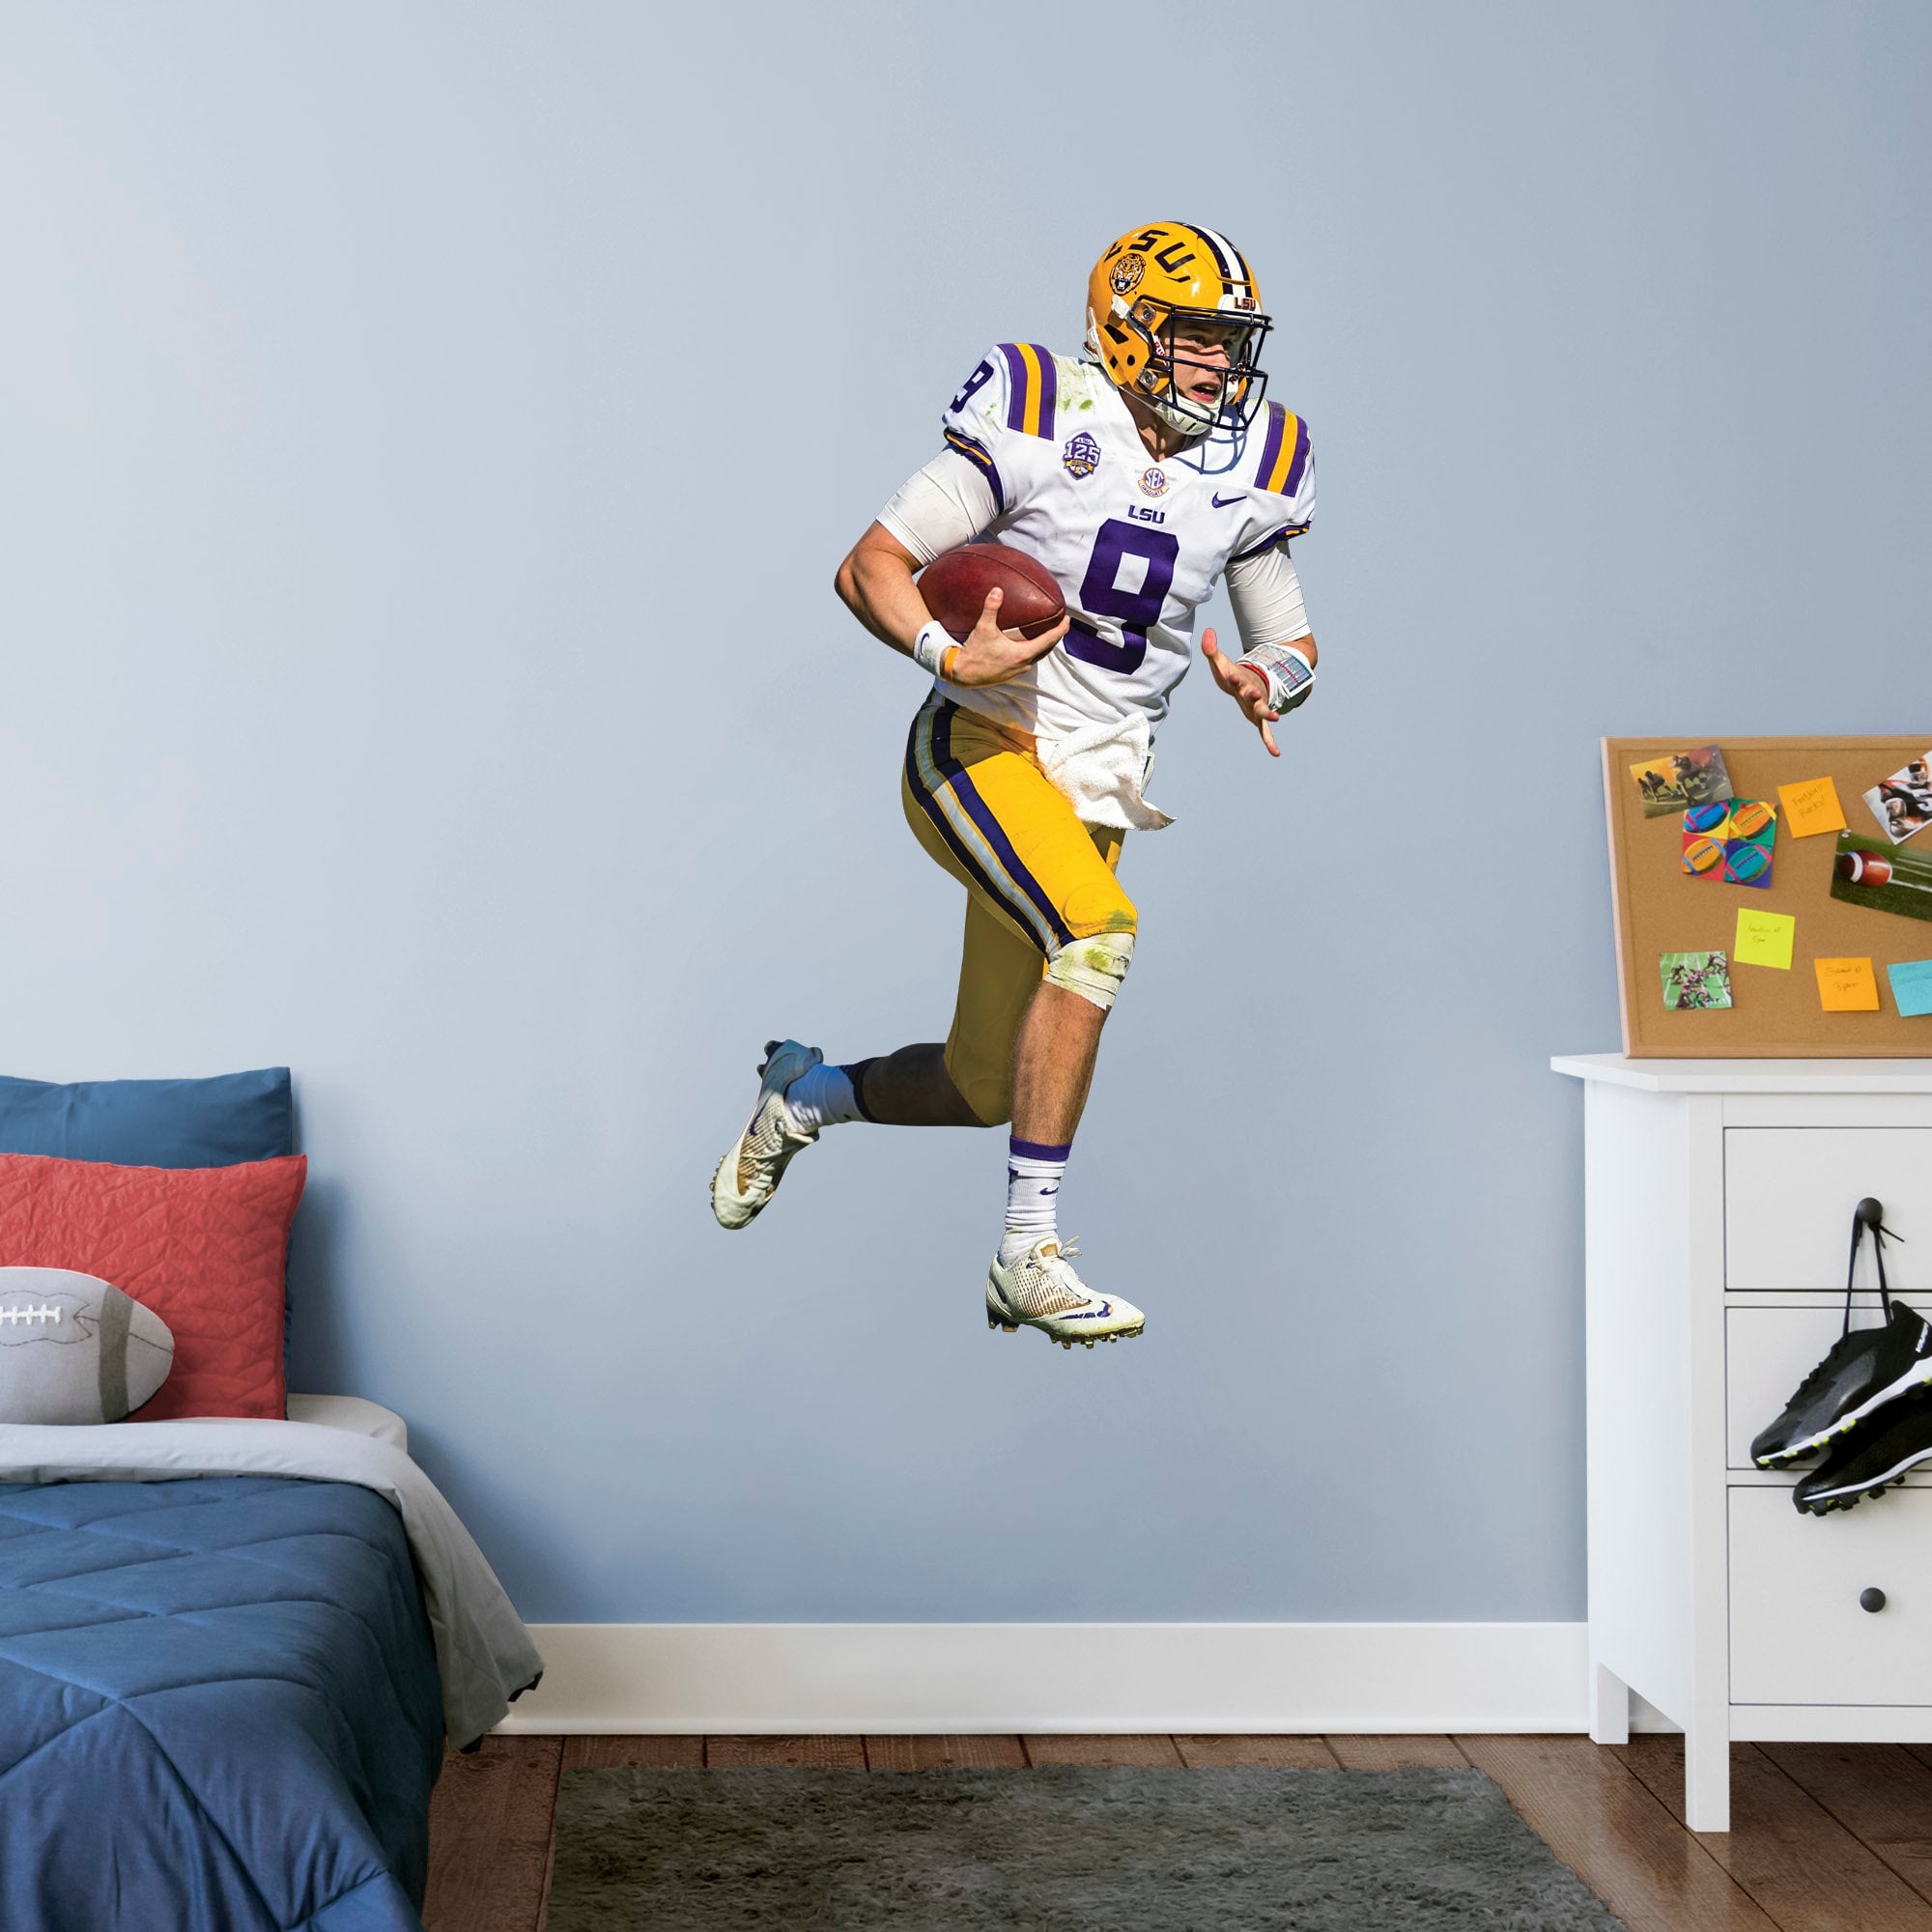 Joe Burrow for LSU Tigers: LSU - Officially Licensed Removable Wall Decal Giant Athlete + 2 Decals (28"W x 51"H) by Fathead | Vi